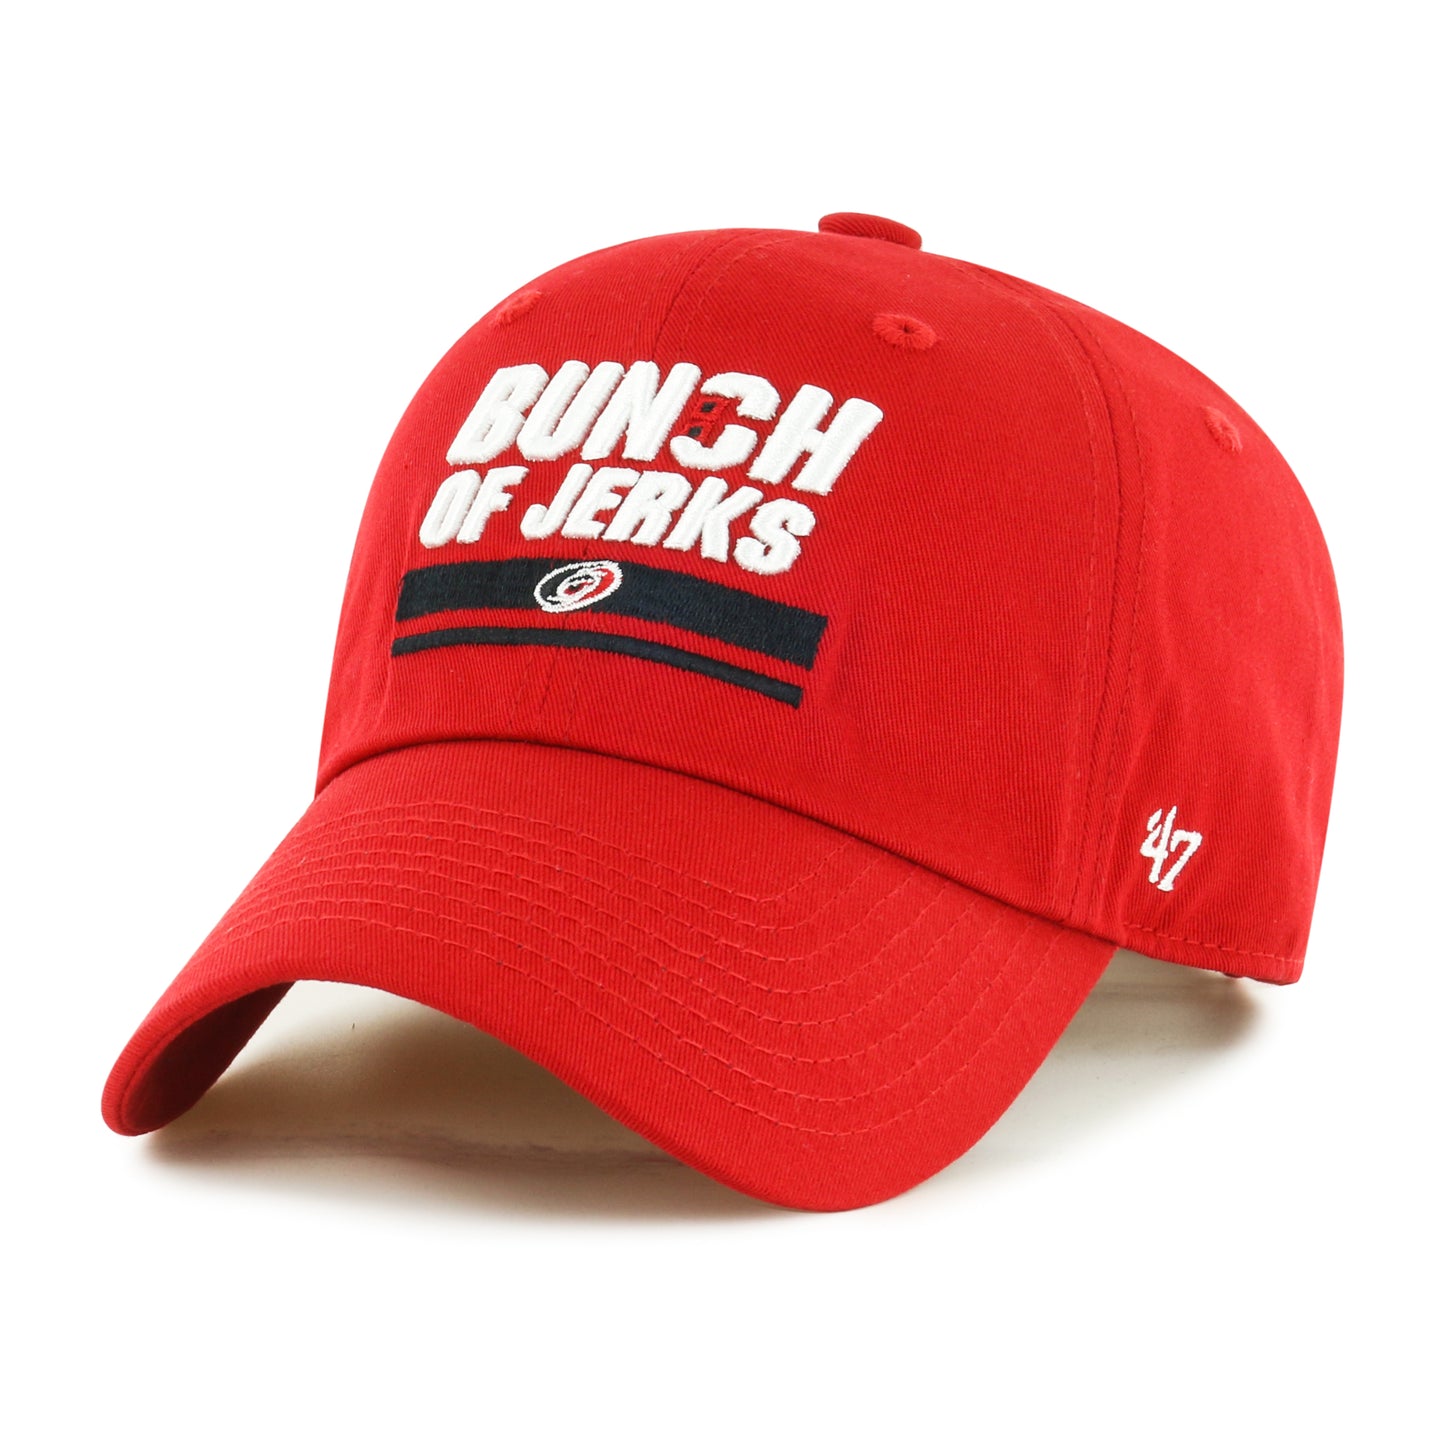 Red hat with Bunch of Jerks emblem on front and white 47 logo on side